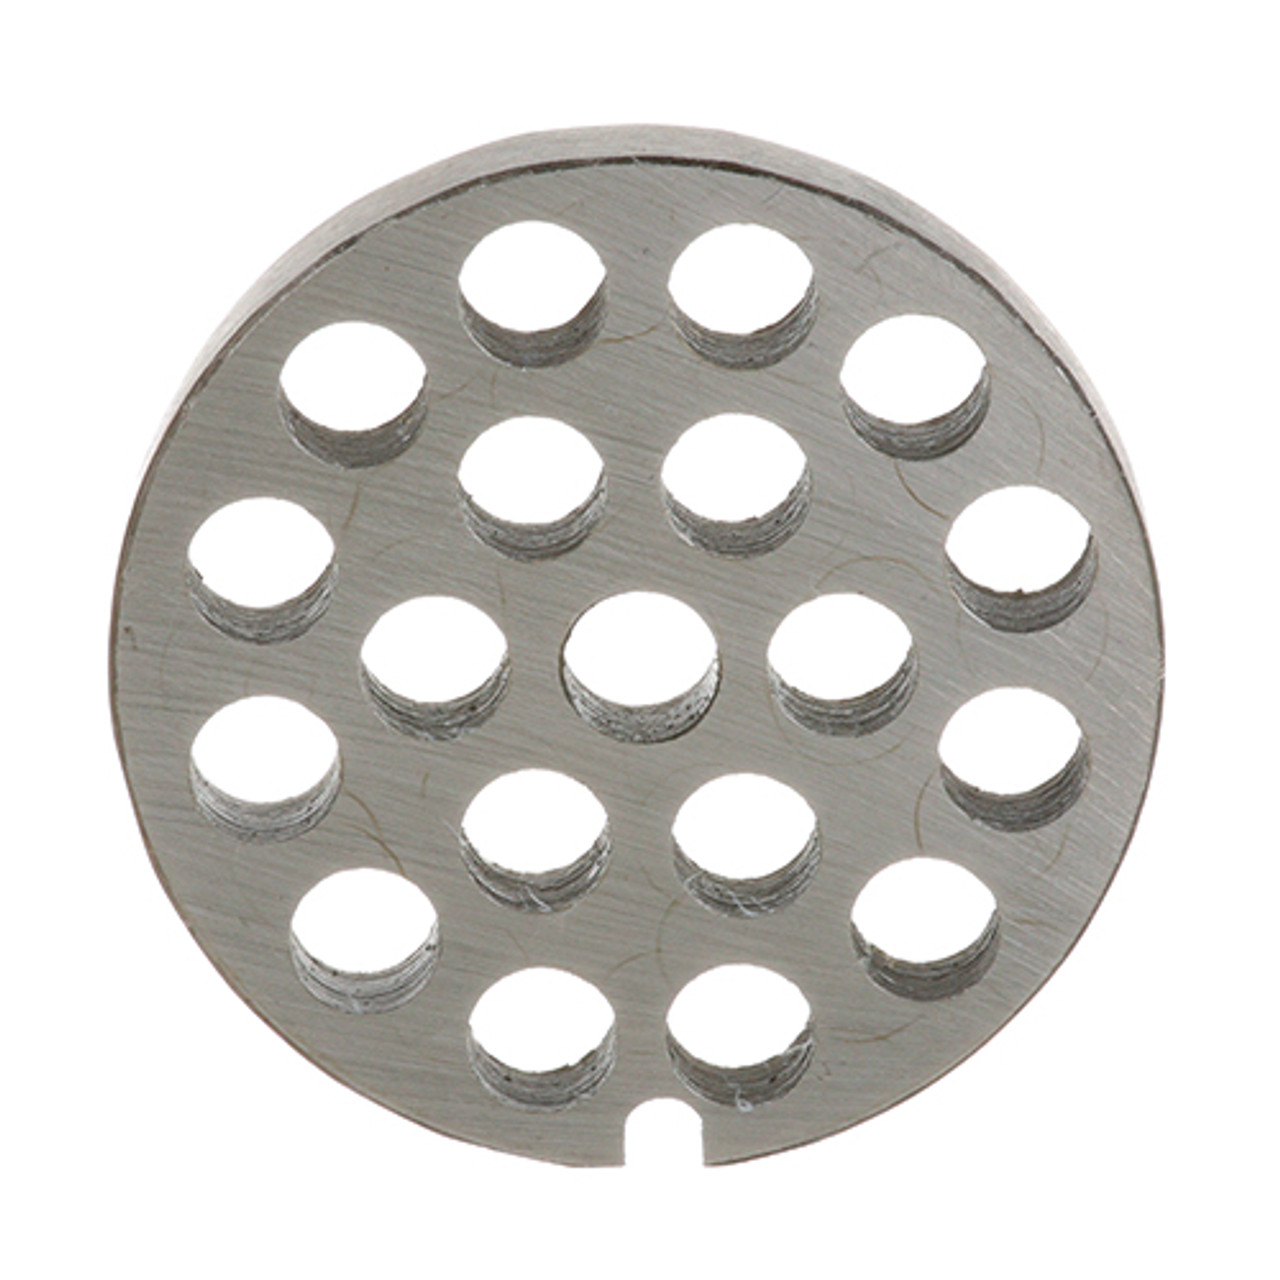 Grinder Plate - 3/8" - Replacement Part For Uniworld 812GP3/8"